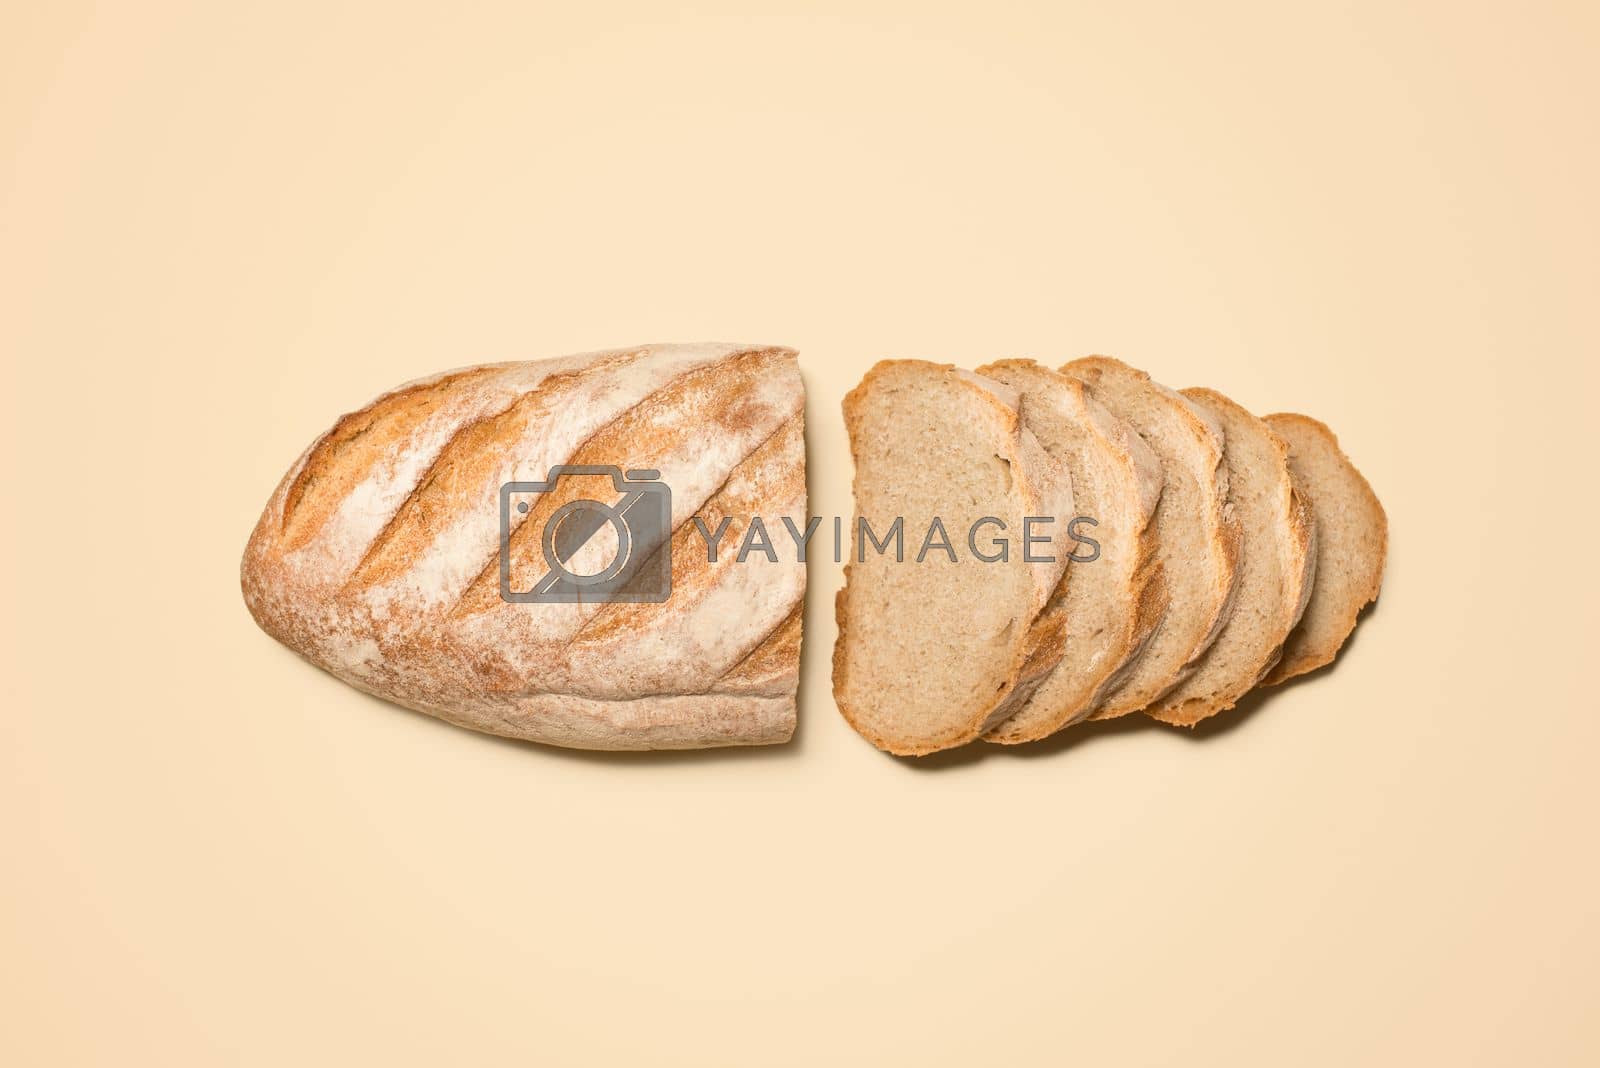 Royalty free image of Baked to absolute perfection. a loaf of bread against a studio background. by YuriArcurs